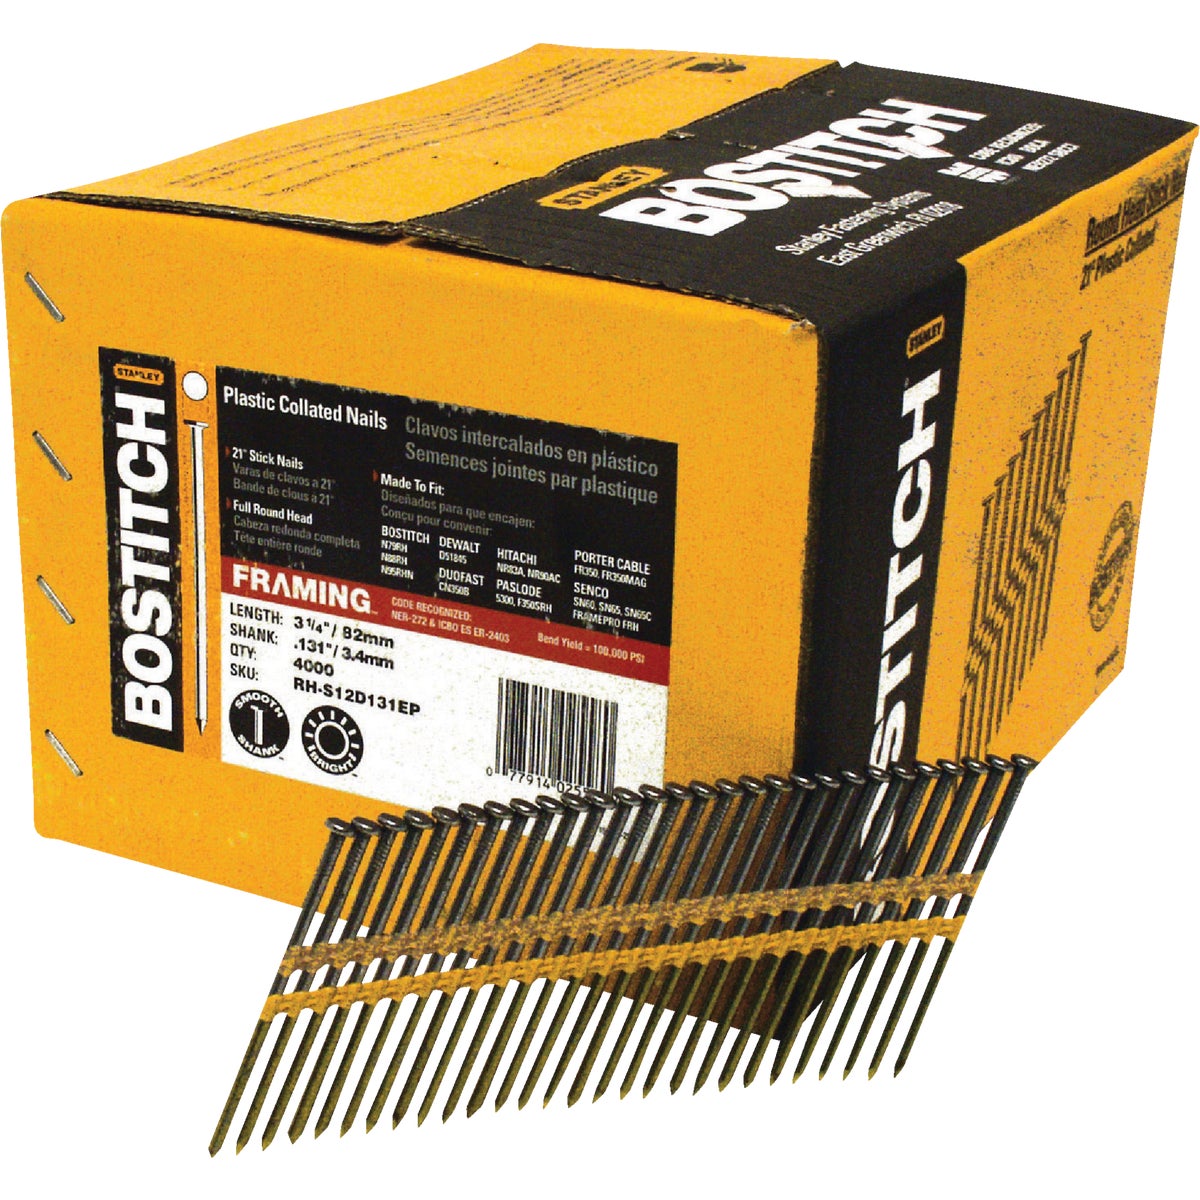 Bostitch 21 Degree Plastic Strip Coated Full Round Head Framing Stick Nails, 3-1/4 In. x .131 In. (4000 Ct.)